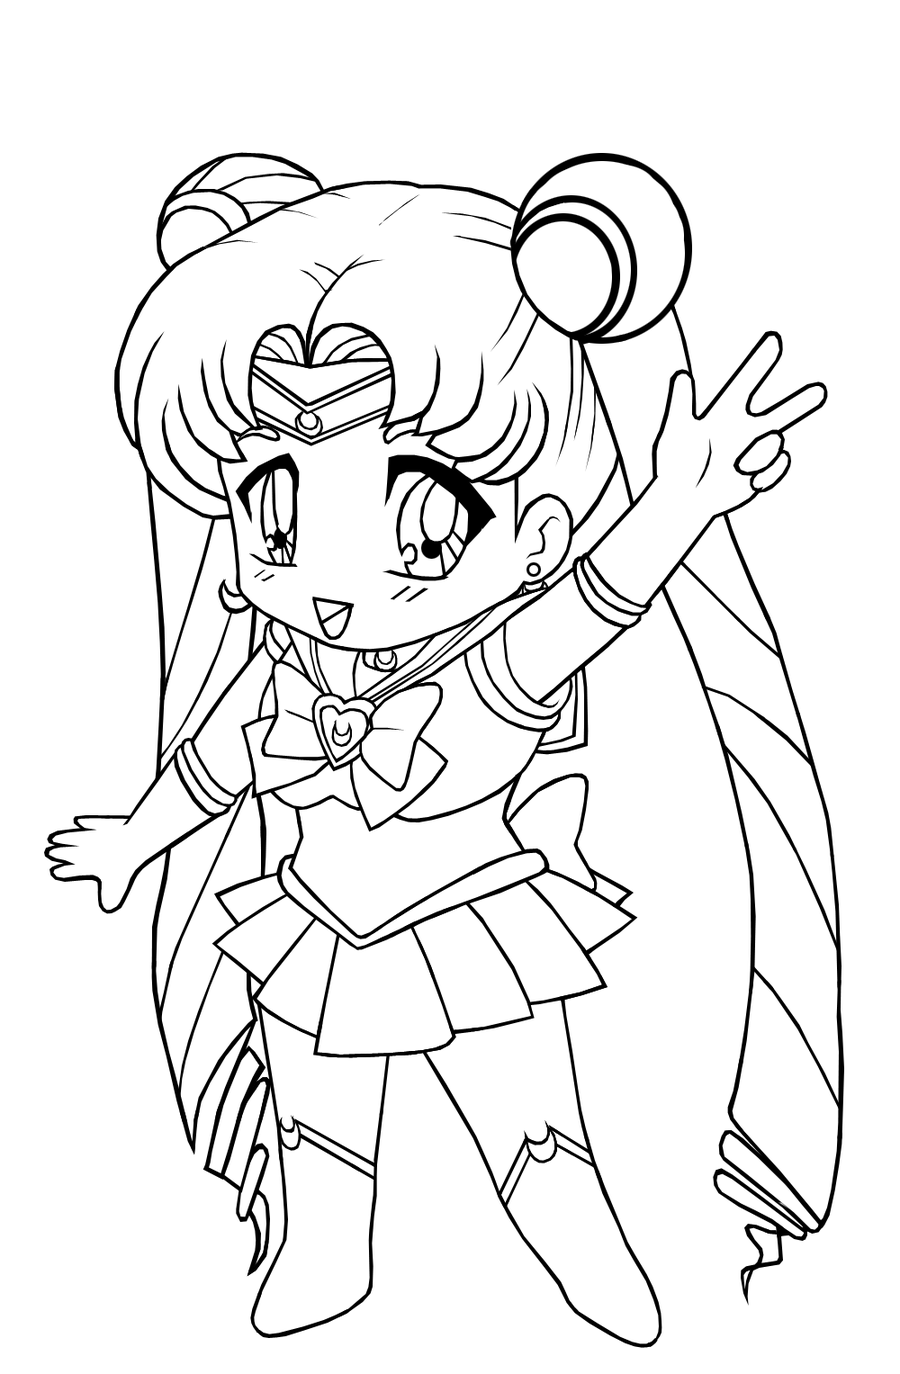 Download Free Printable Chibi Coloring Pages For Kids